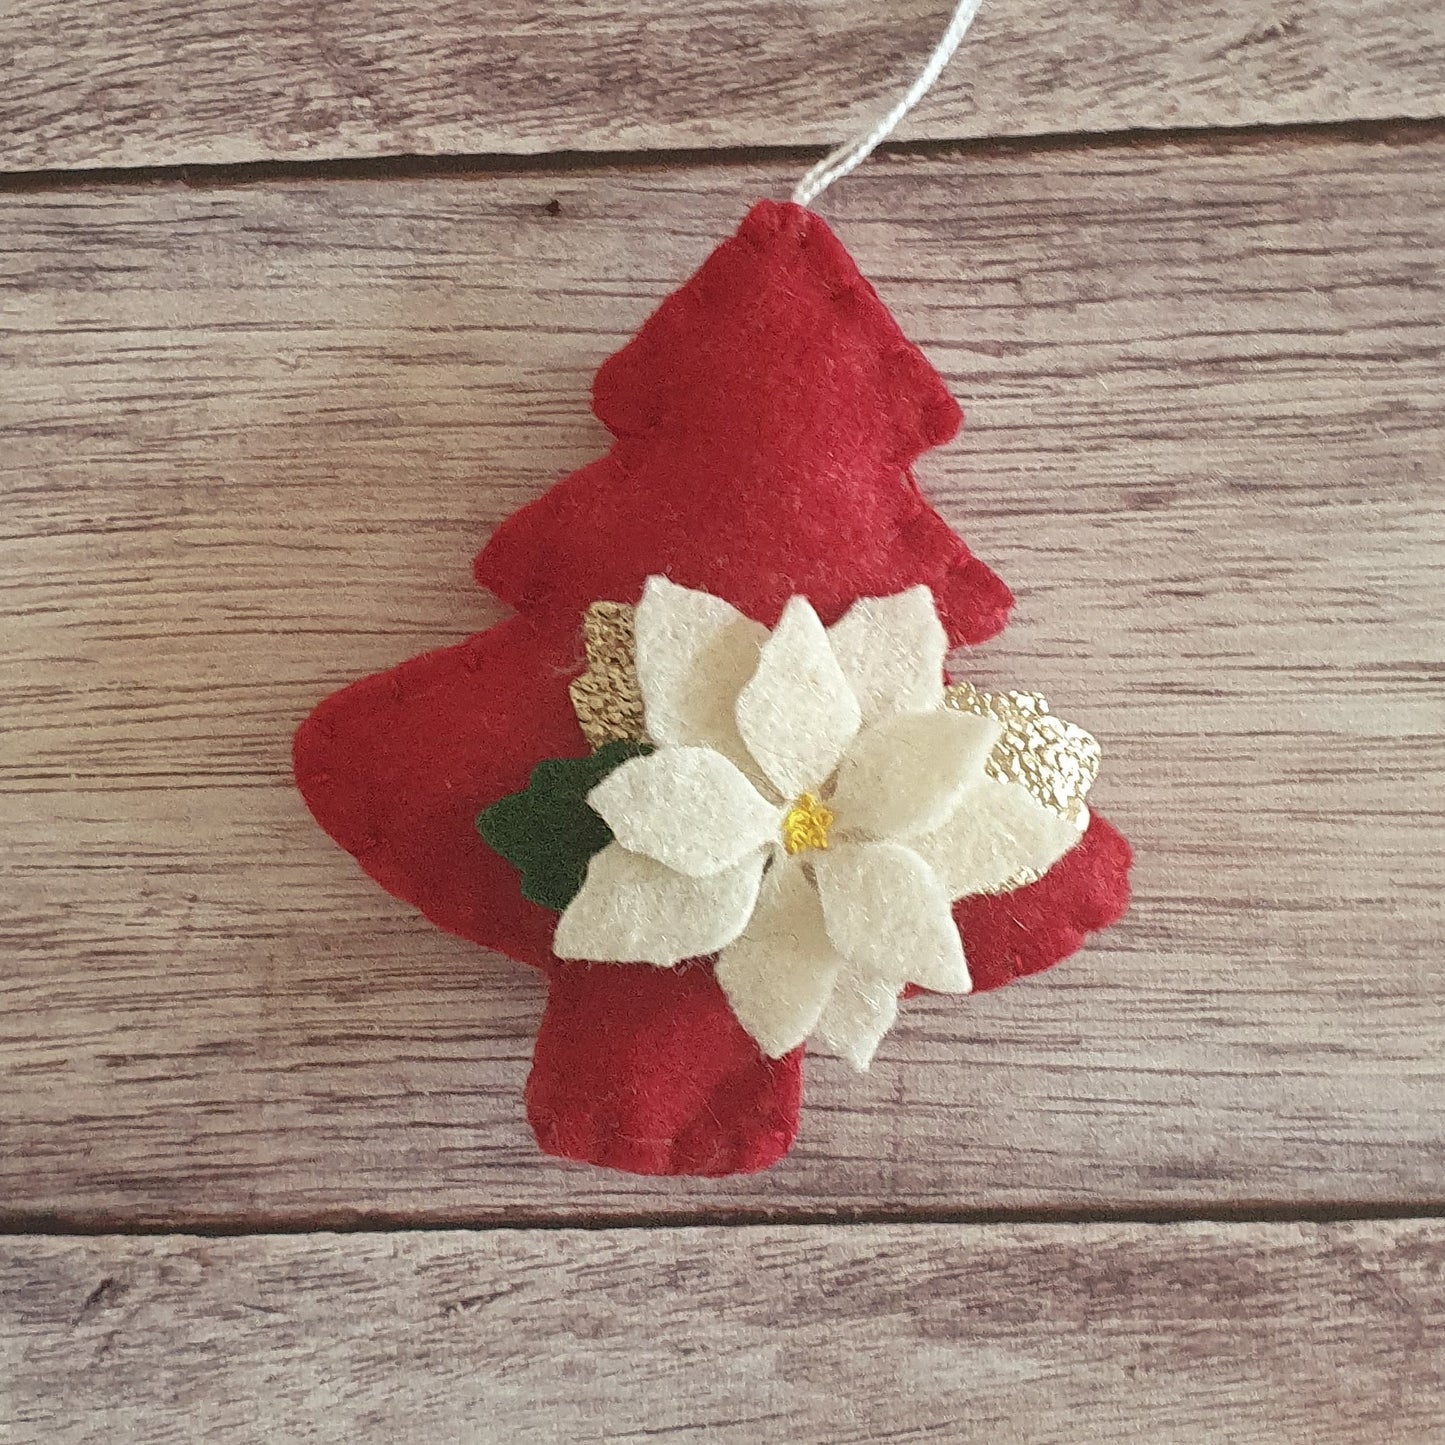 Christmas tree ornament with poinsettia flower - felt hanging decoration